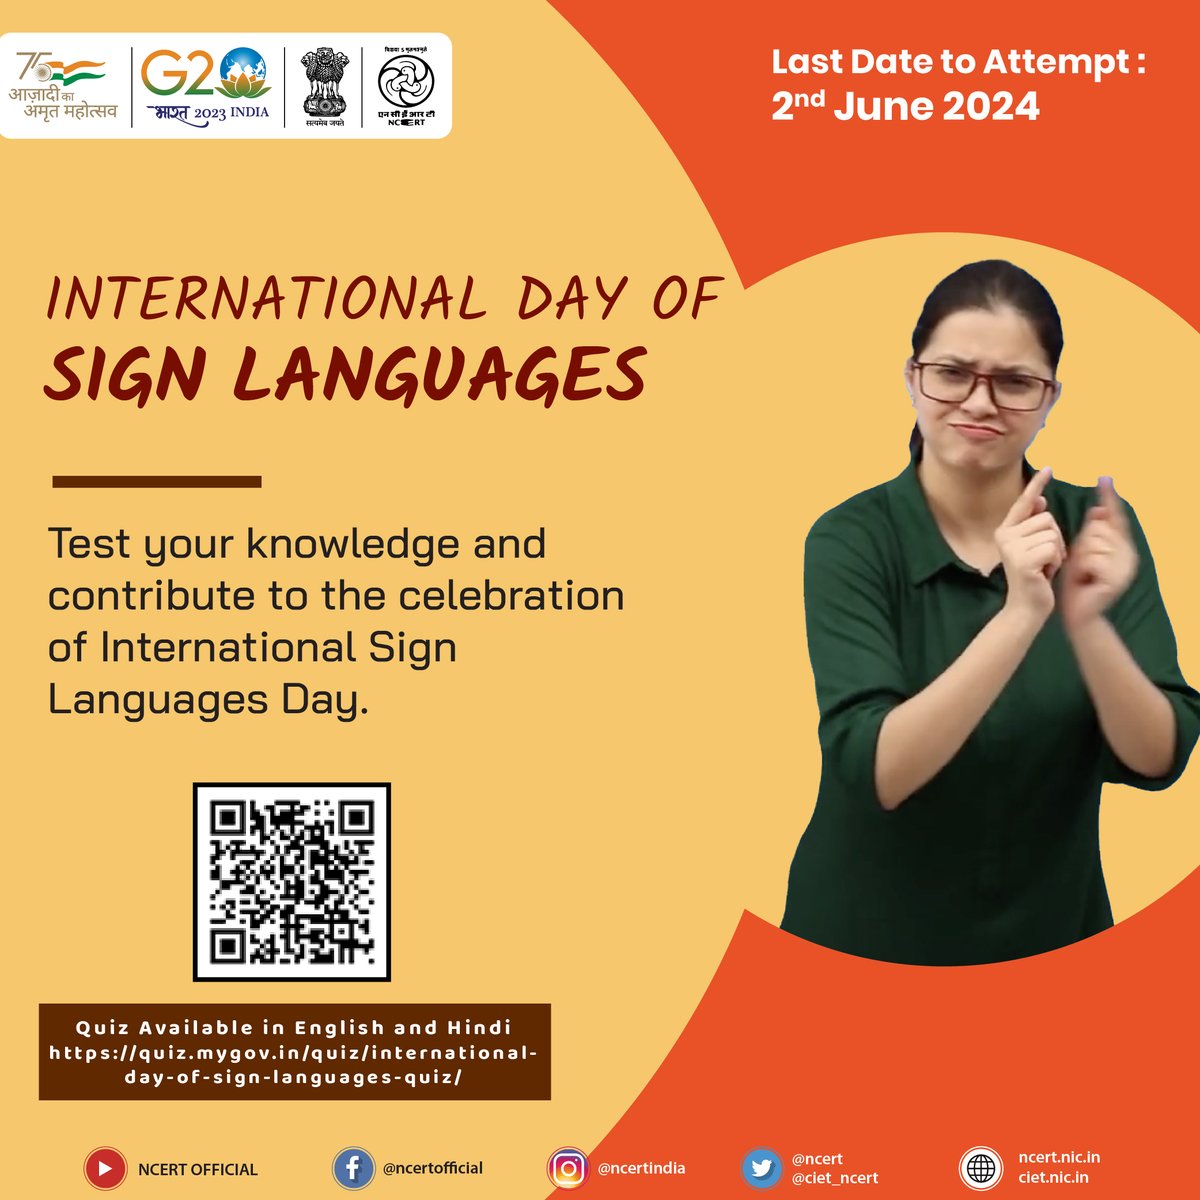 Join the International Day of Sign Languages Quiz! Let’s honor the rich diversity and linguistic identity of deaf individuals and sign language users worldwide. Test your knowledge in the International Day of Sign Languages quiz and help create a world where signing knows no